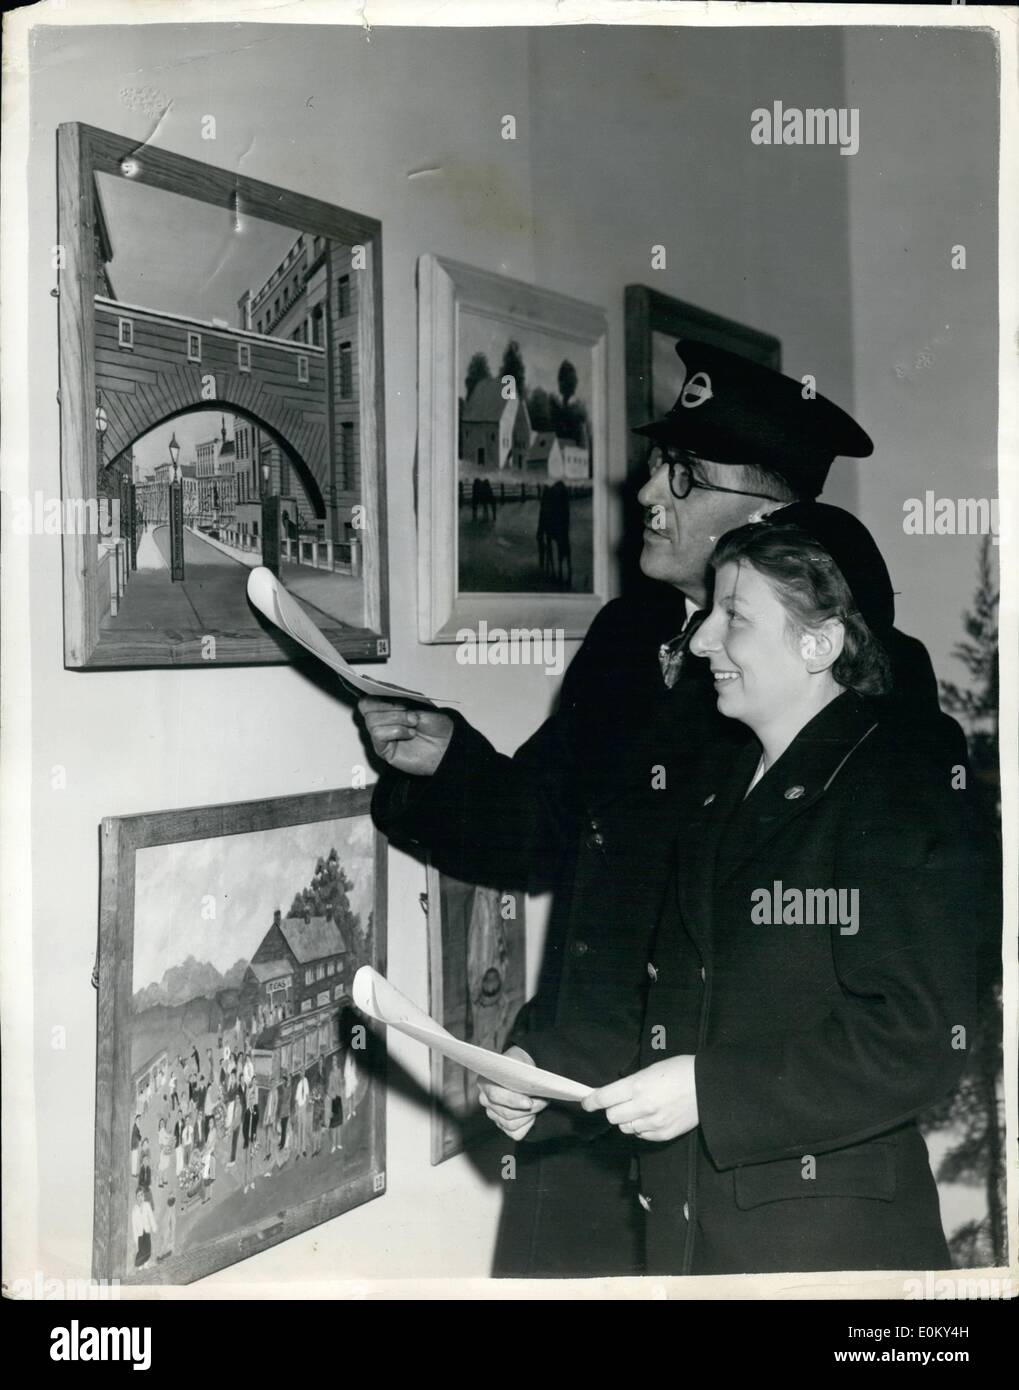 Nov. 11, 1952 - London Transport Art Exhibition. The Sixth Annual Exhibition of the London Transport Art Group, opened at Exhibition Hall, Charing Cross London Transport Station. Keystone Photo Shows:- Collector Sydney Fitter, of Hornchurch, and Joan Mitchell, a porter, of Battersea - looking at some of the exhibits. Stock Photo